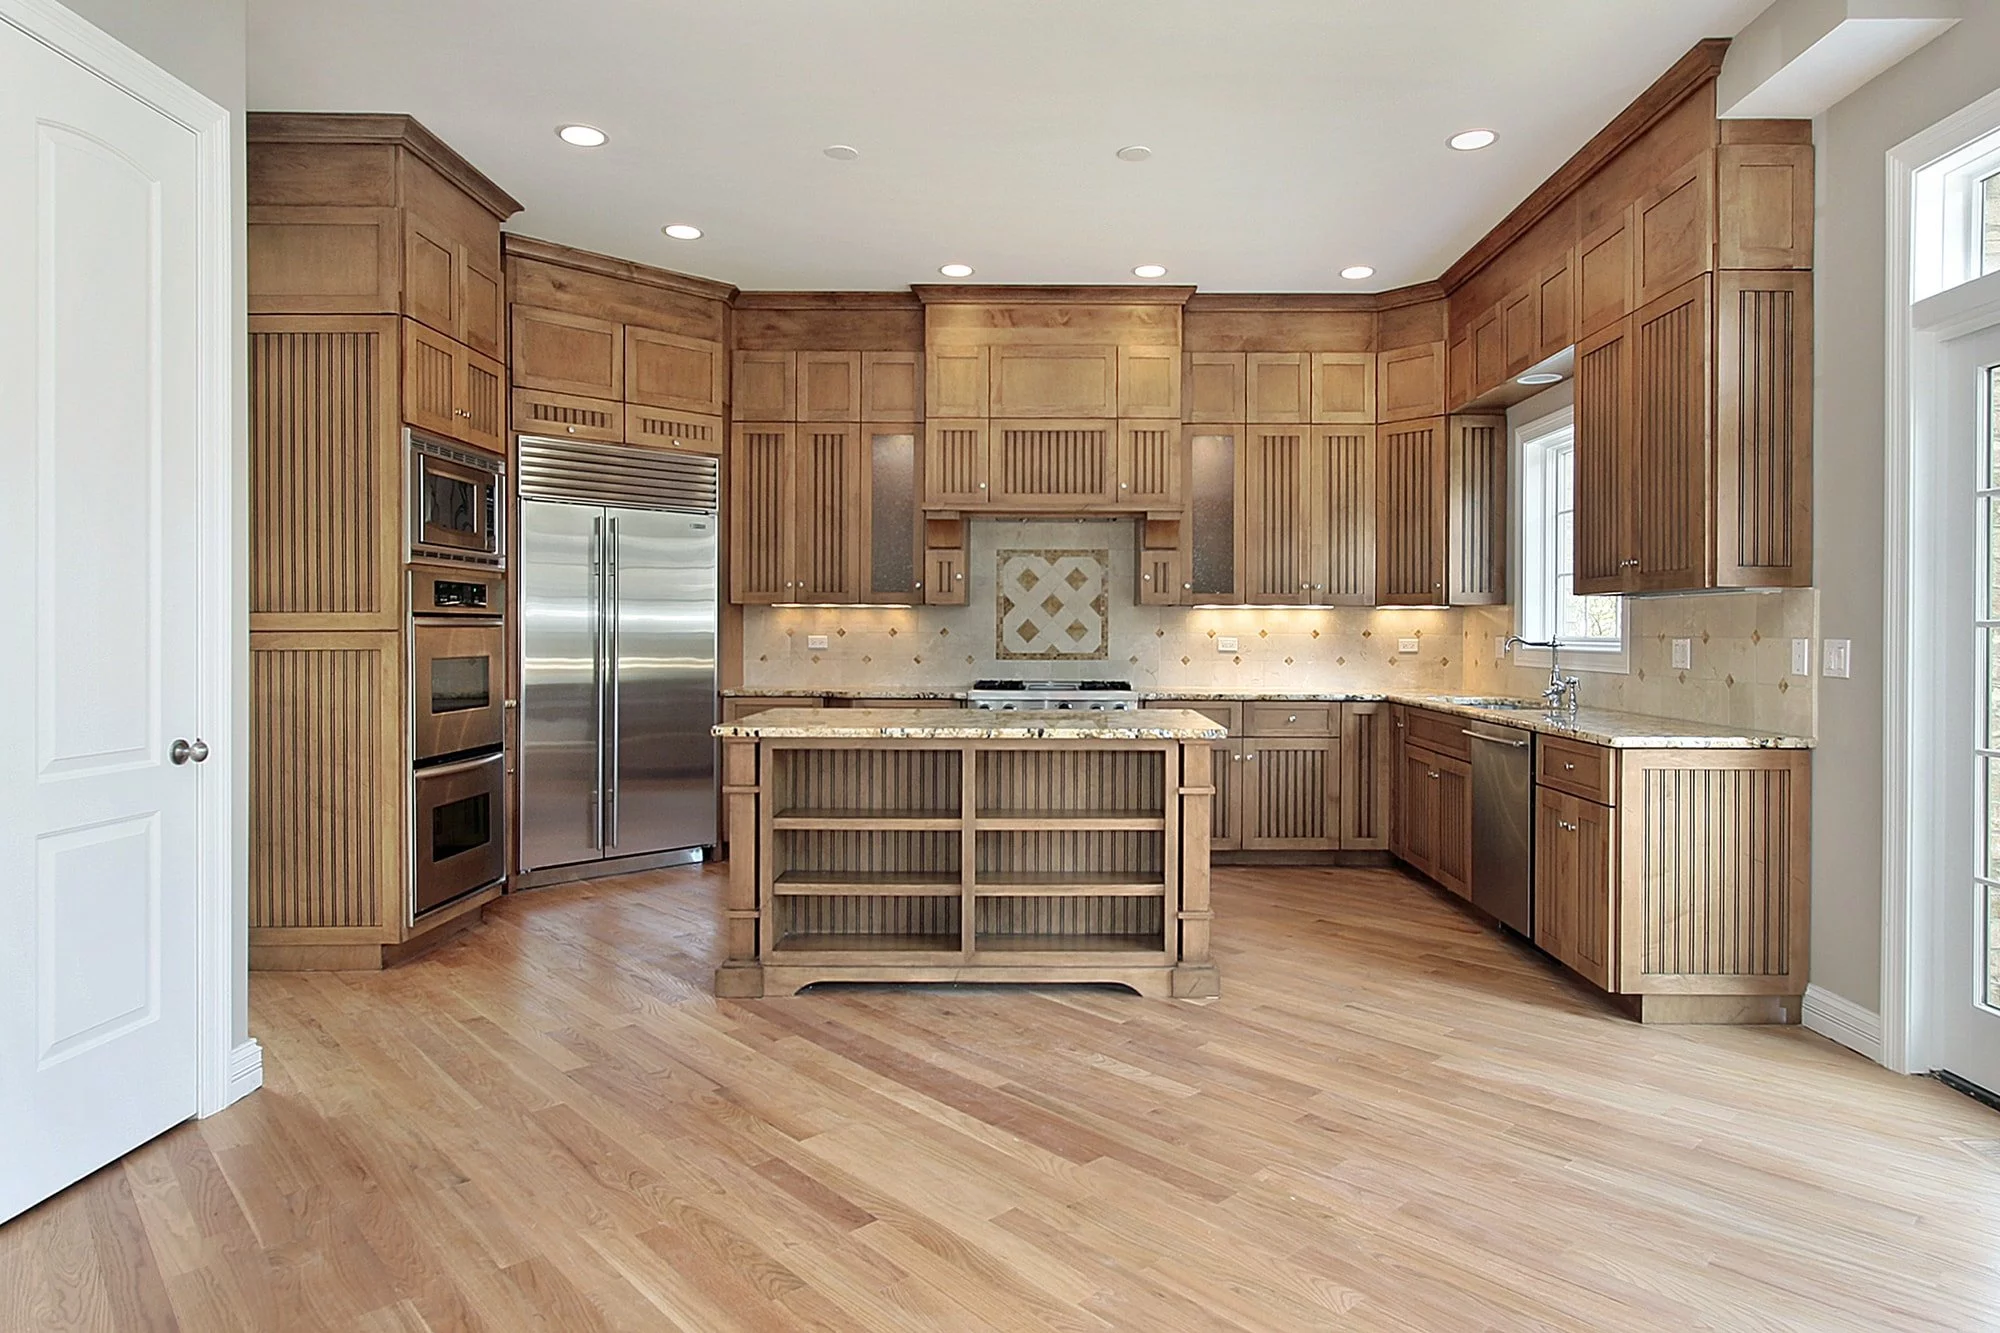 A Countdown of The 9 Most Common Kitchen Remodel Mistakes in Tallahassee and How to Avoid Them